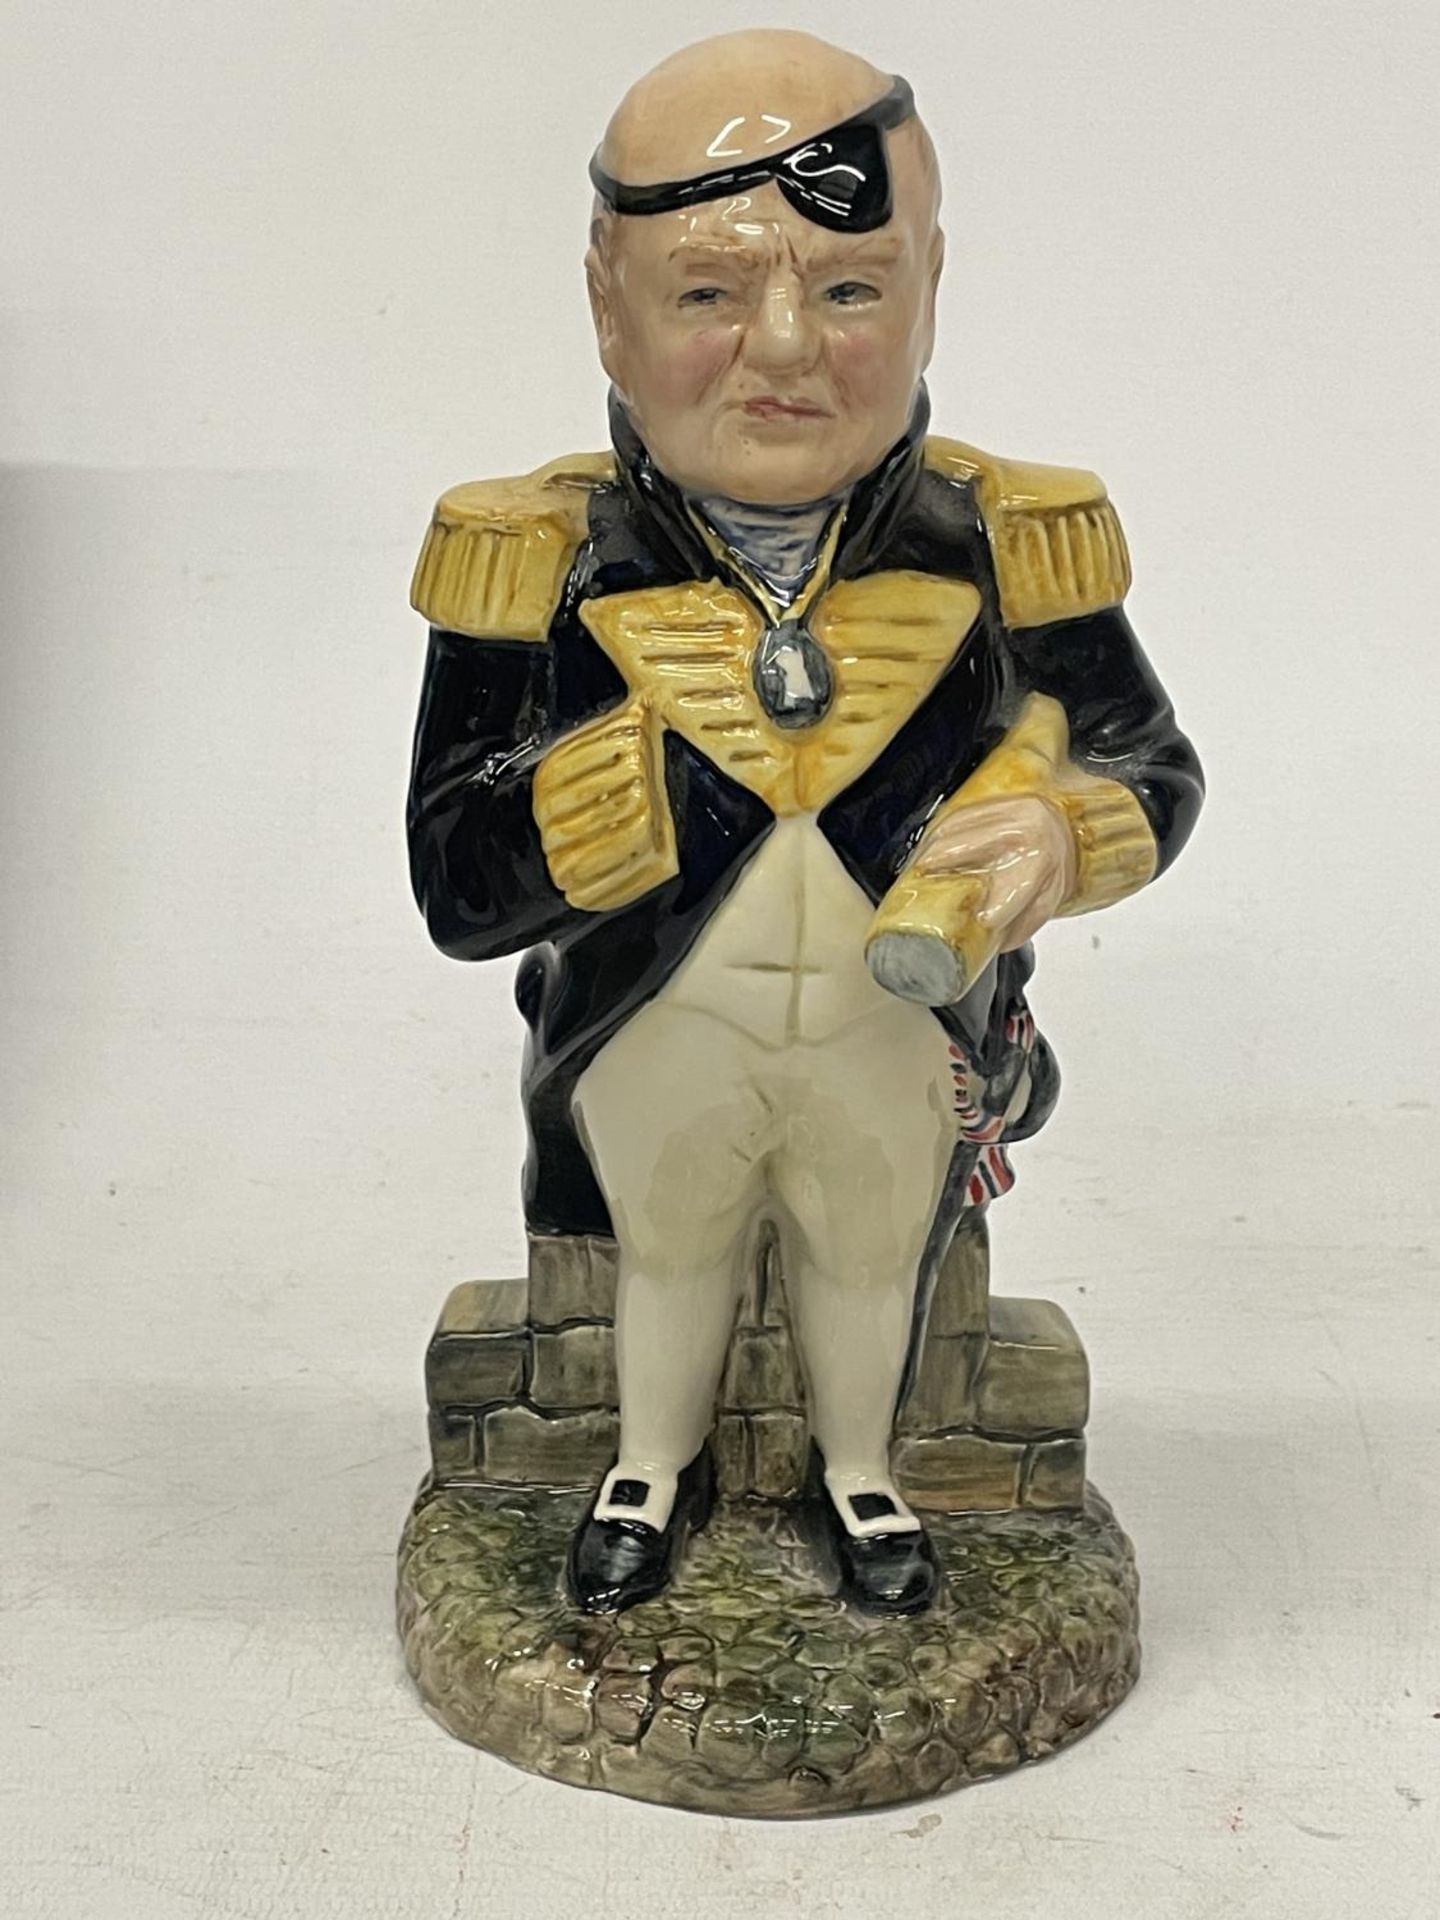 A BAIRSTOW POTTERY WINSTON CHURCHILL FIGURE "FIRST SEA LORD" - LIMITED EDITION NO. 16